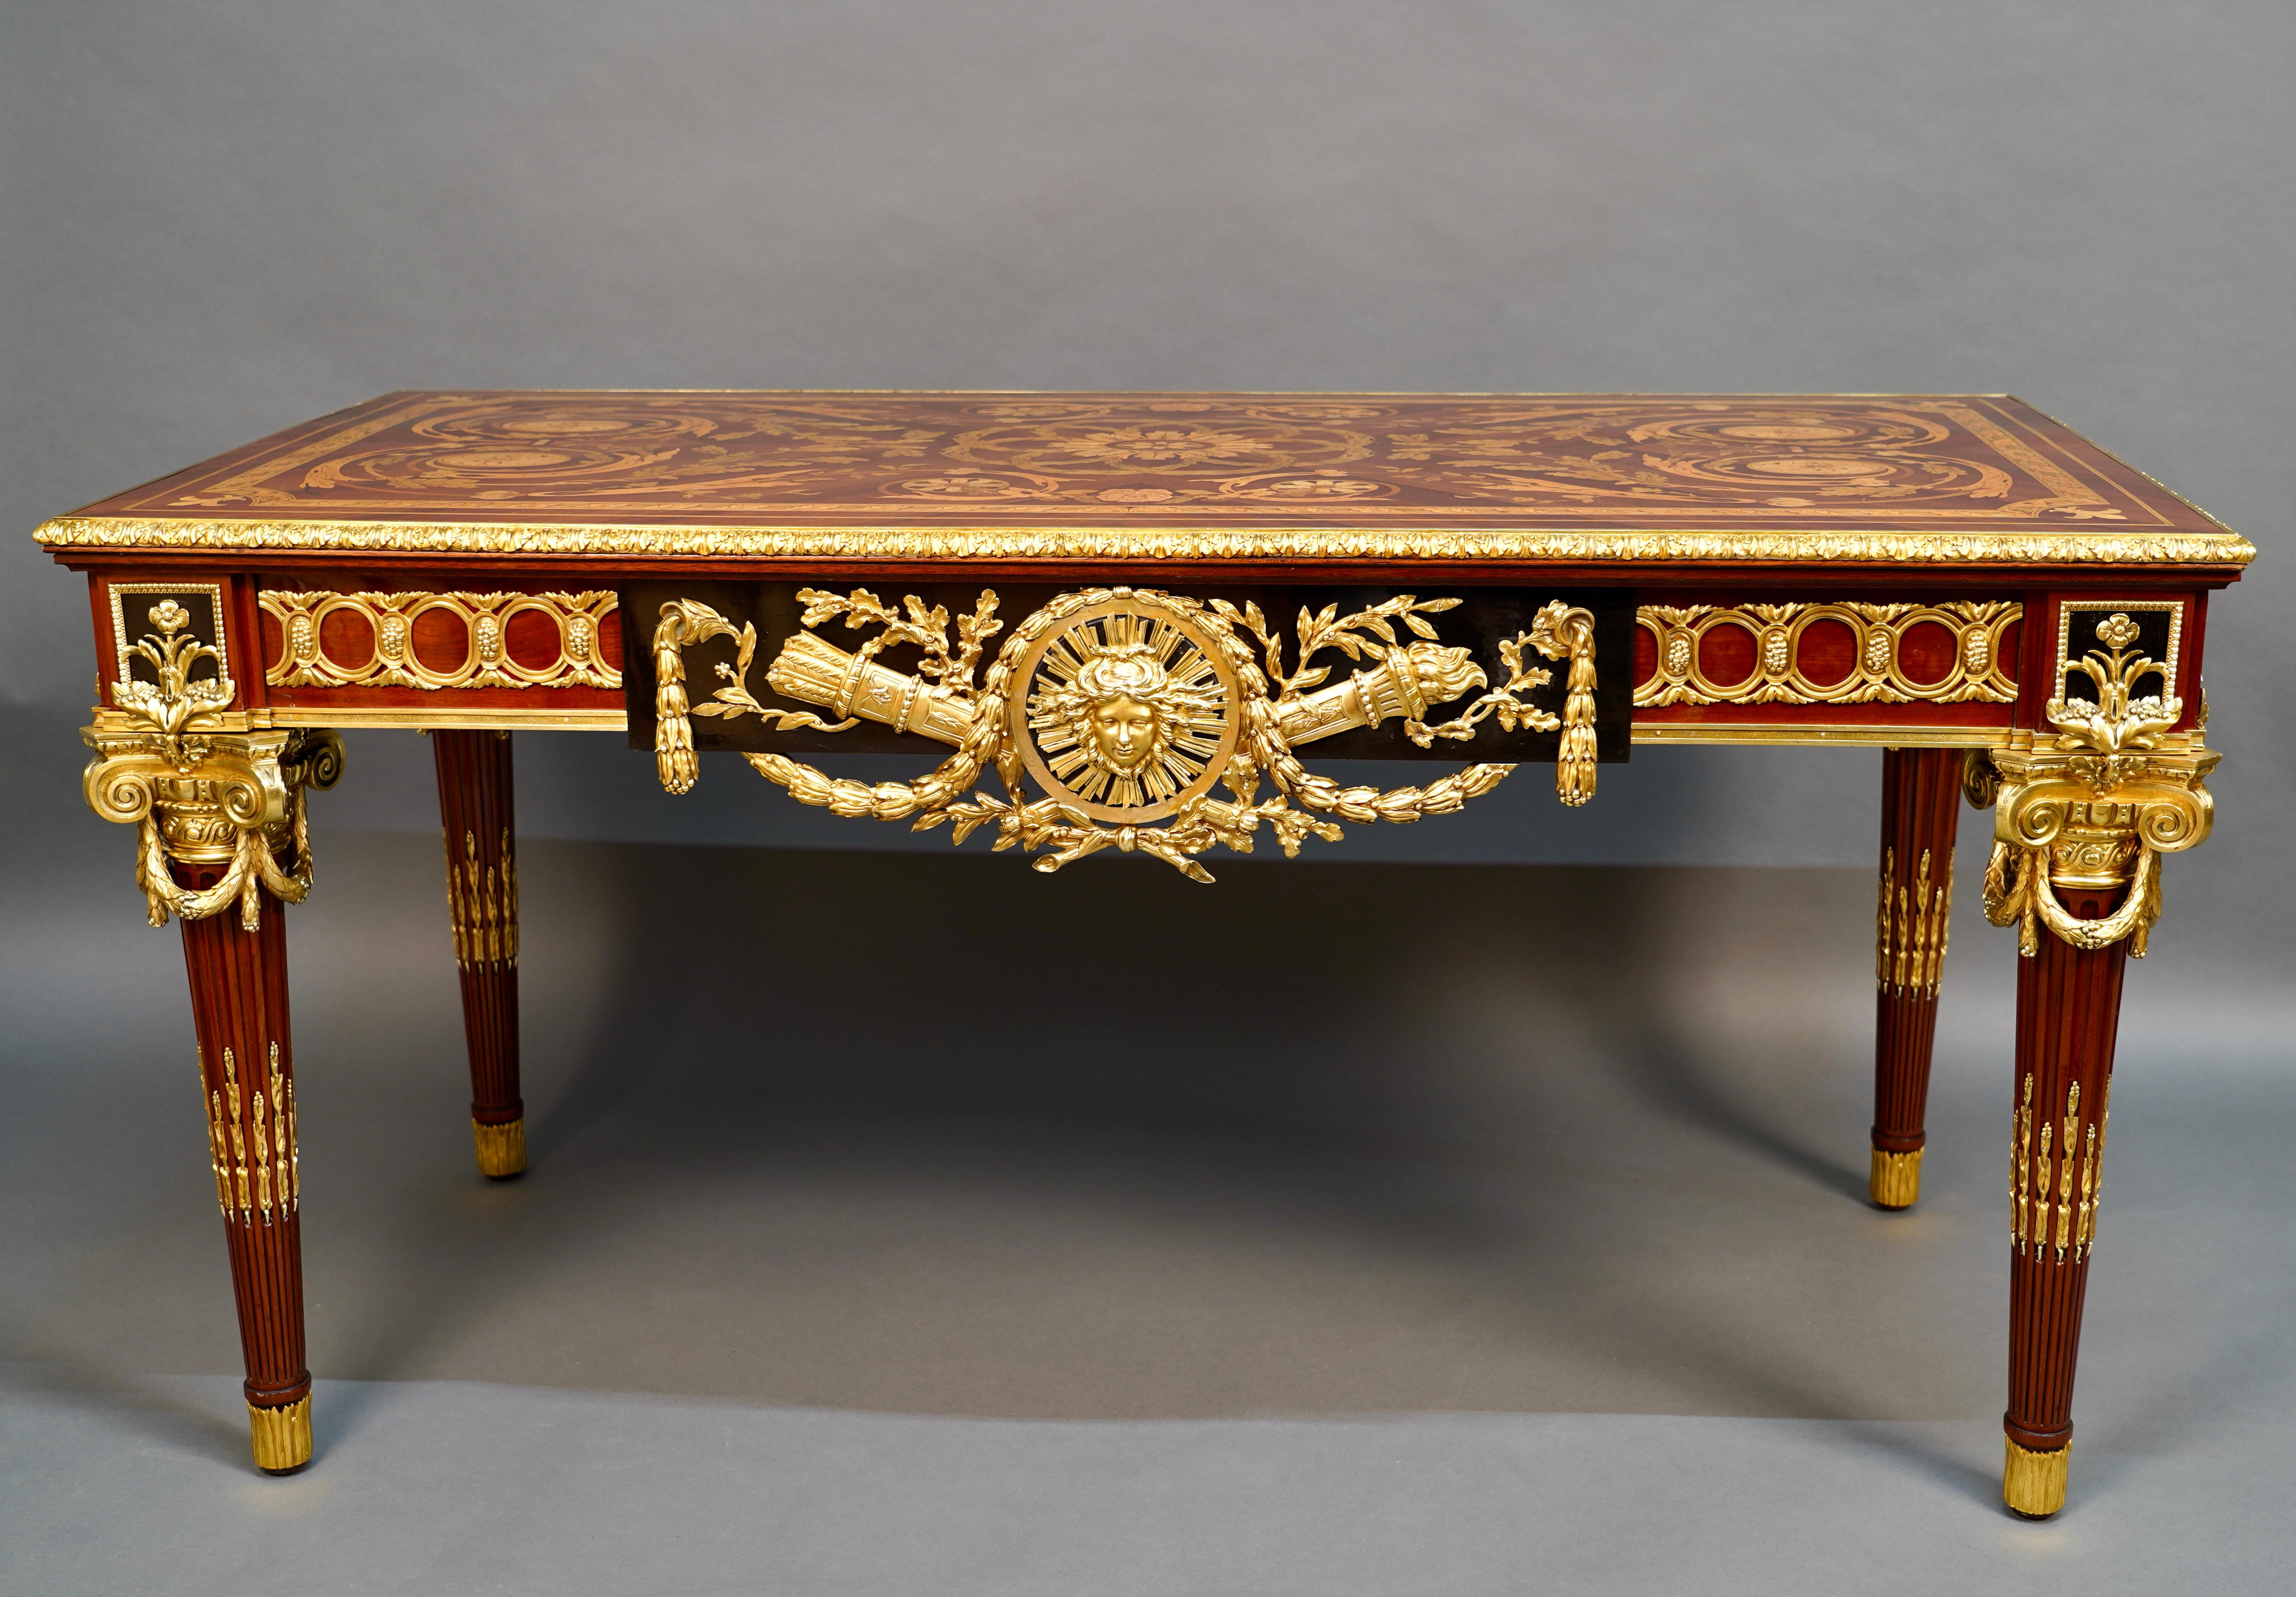 Beautiful ceremonial table in mahogany veneer, black stained wood and gilded bronze. The top with symmetrical decoration presents an important marquetry decoration of oak leaves, garlands and plant scrolls, embellished at the corners with